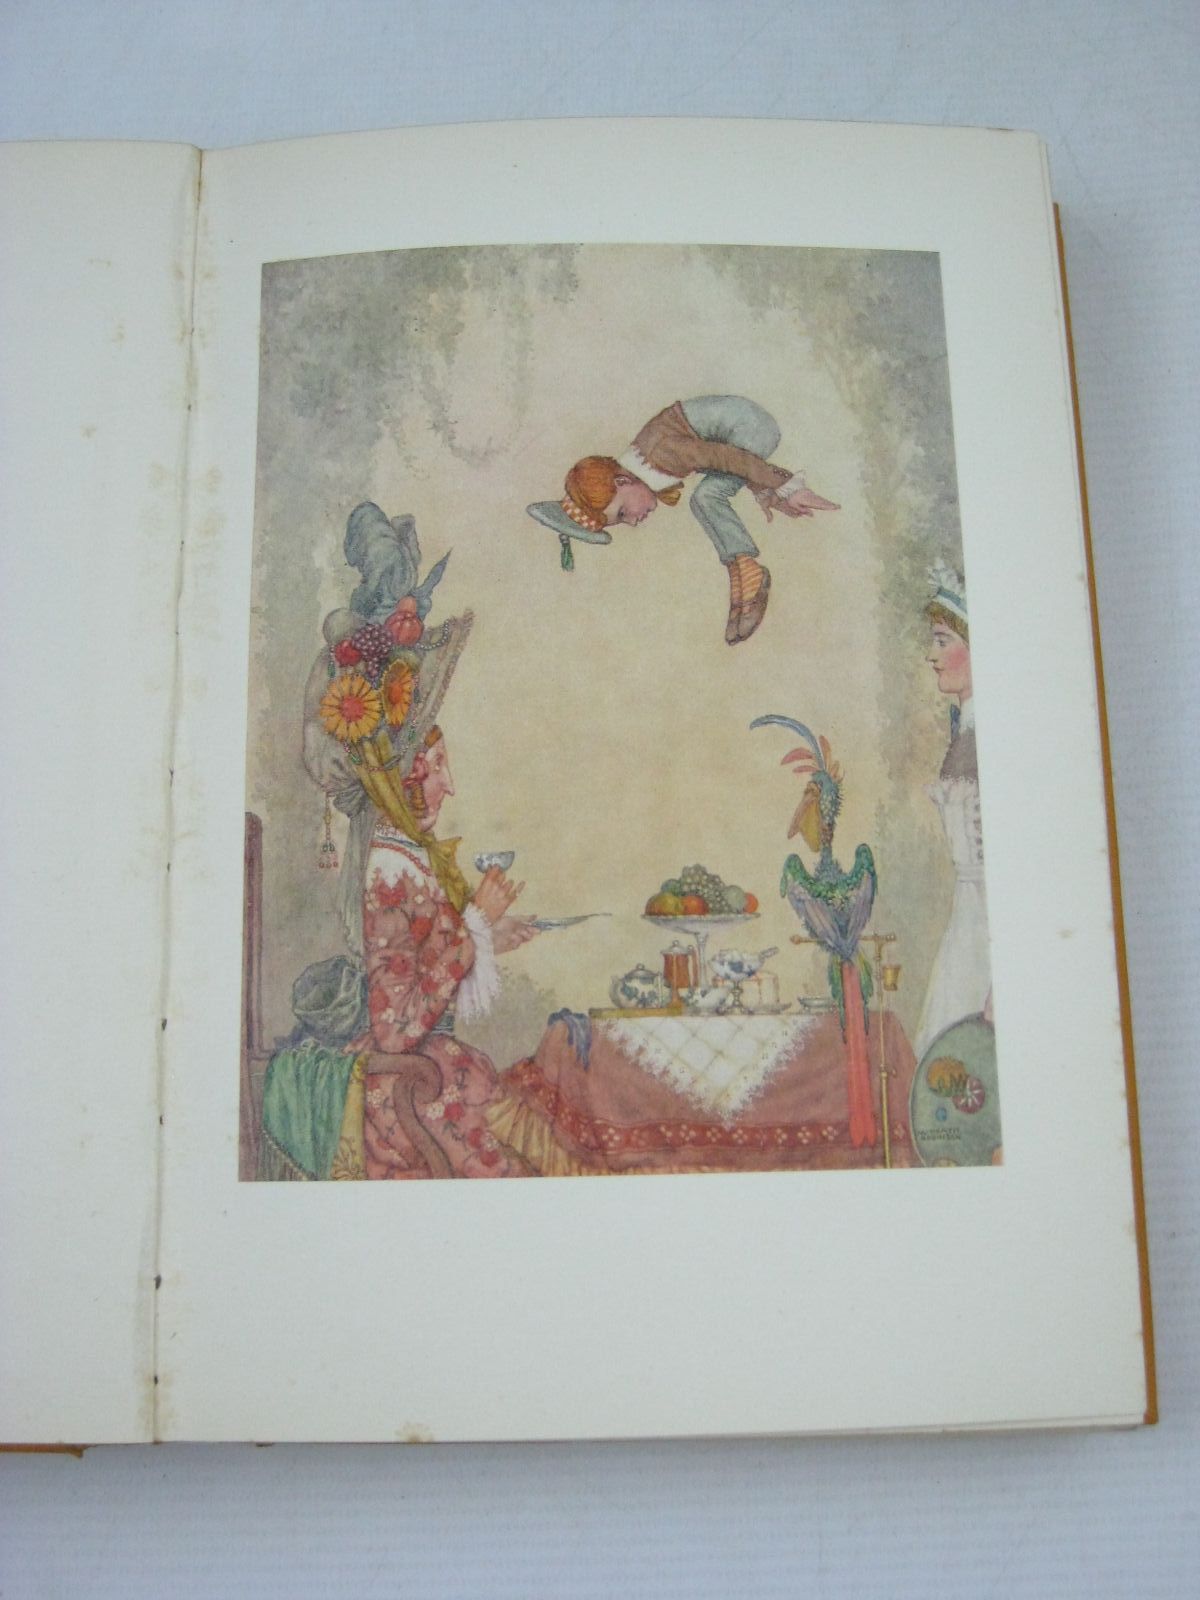 Photo of BILL THE MINDER written by Robinson, W. Heath illustrated by Robinson, W. Heath published by Hodder & Stoughton (STOCK CODE: 1405141)  for sale by Stella & Rose's Books